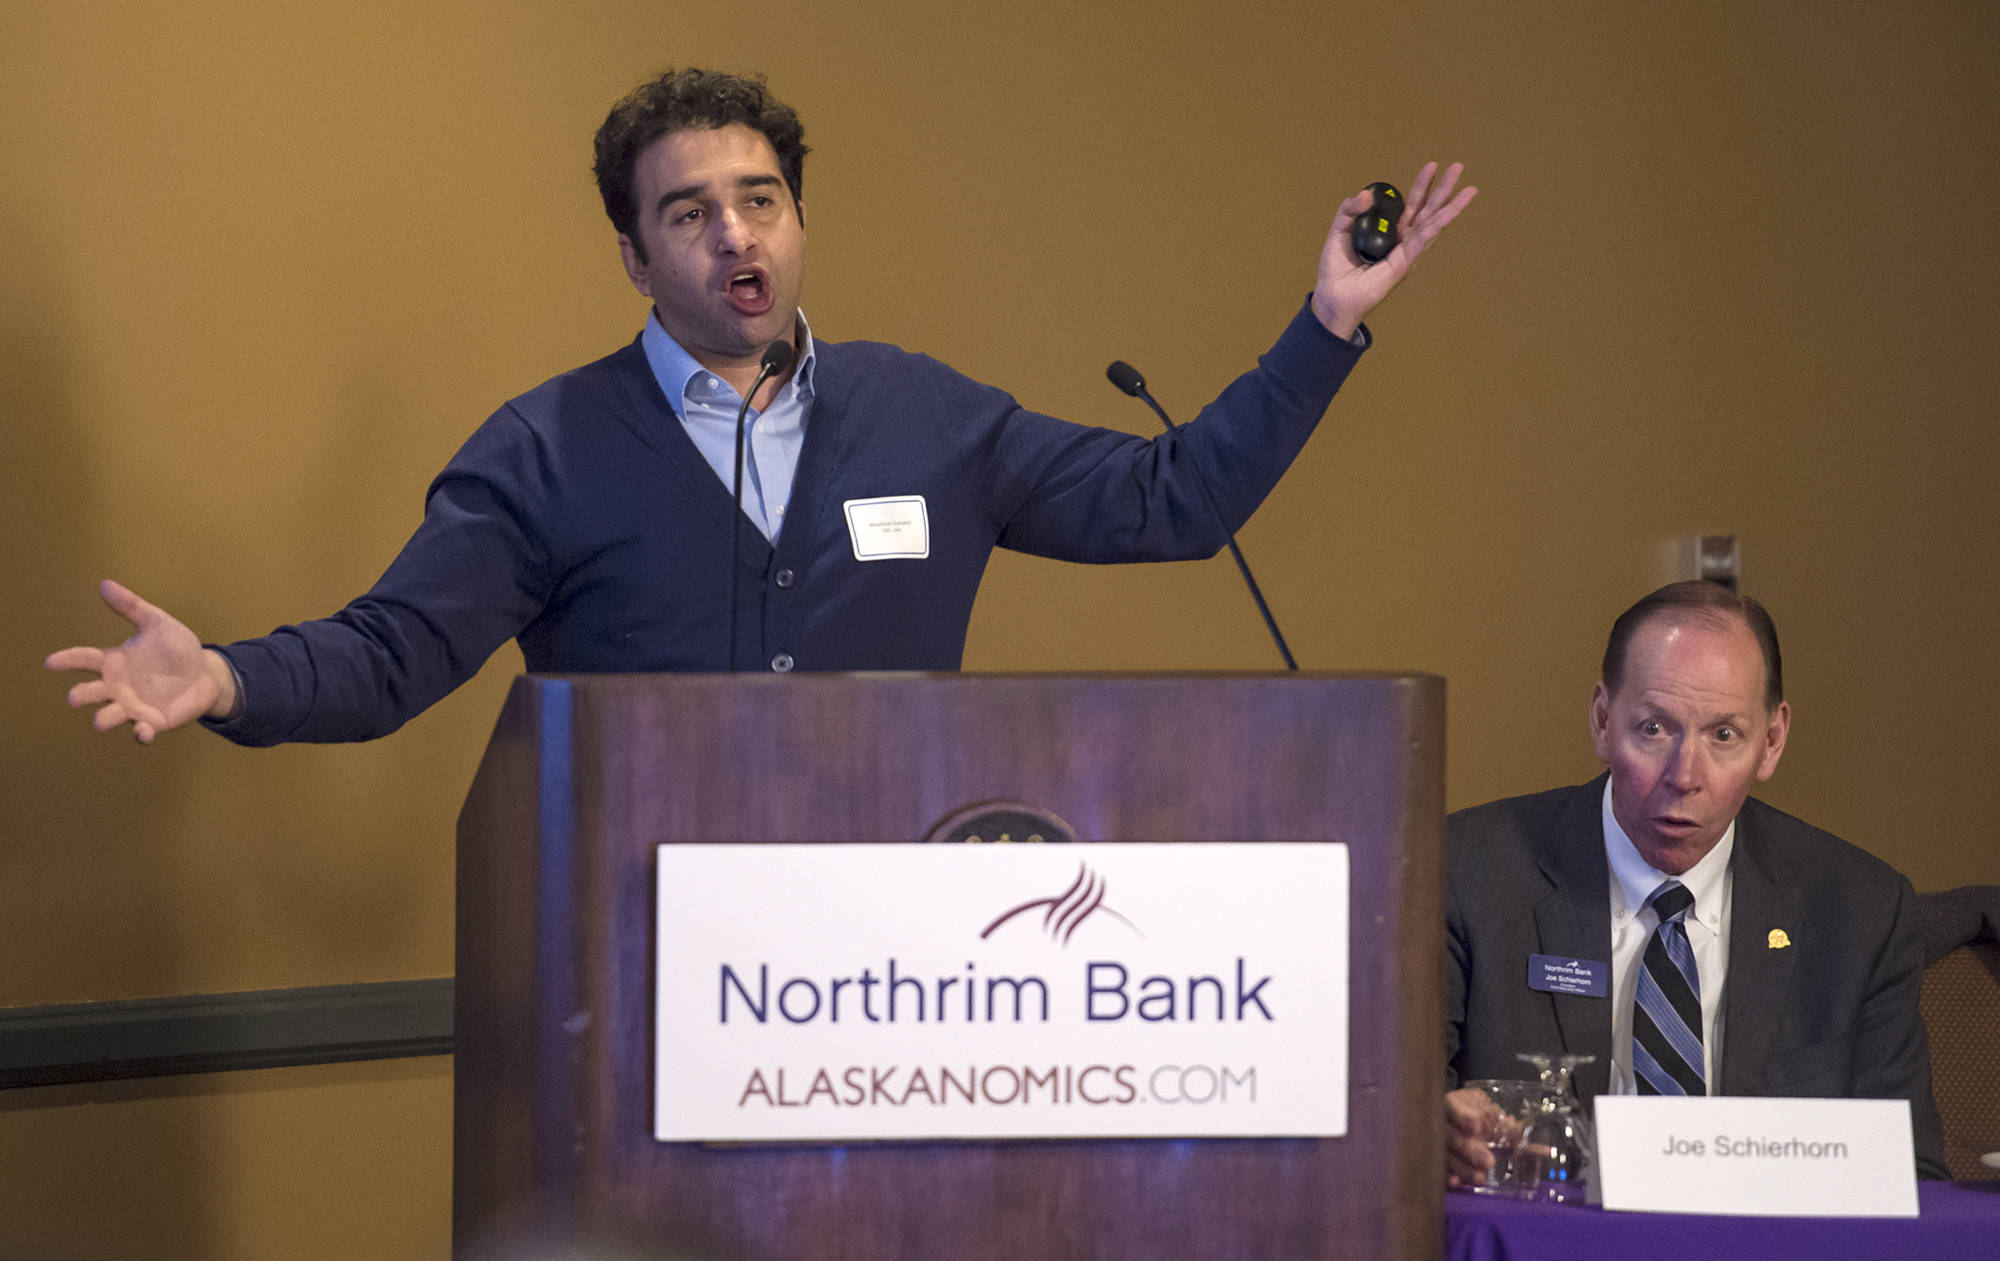 Mouhcine Guettabi, Assistant Professor of Economics at the University of Alaska, speaks at the Northrim Bank Economic Summit at the Baranof Hotel on Wednesday, April 11, 2018. Joe Schierhorn, right, is President and CEO of Northrim Bank Corp. (Michael Penn | Juneau Empire)